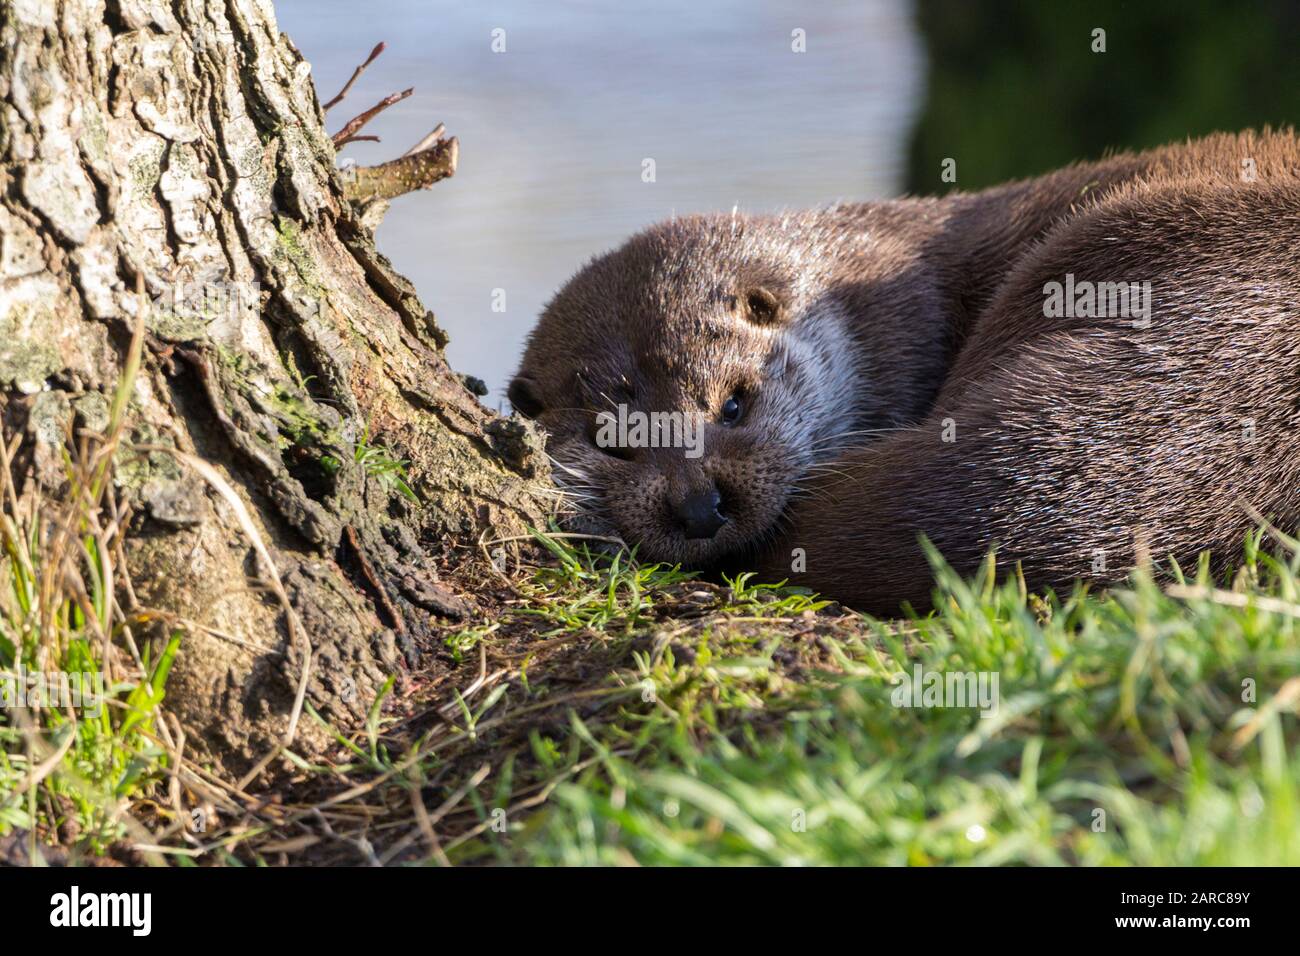 Otter Lutra lutra aquatic mammal dog like face small ears long white whiskers long body and strong thick tapered tail. Has short legs and webbed feet Stock Photo